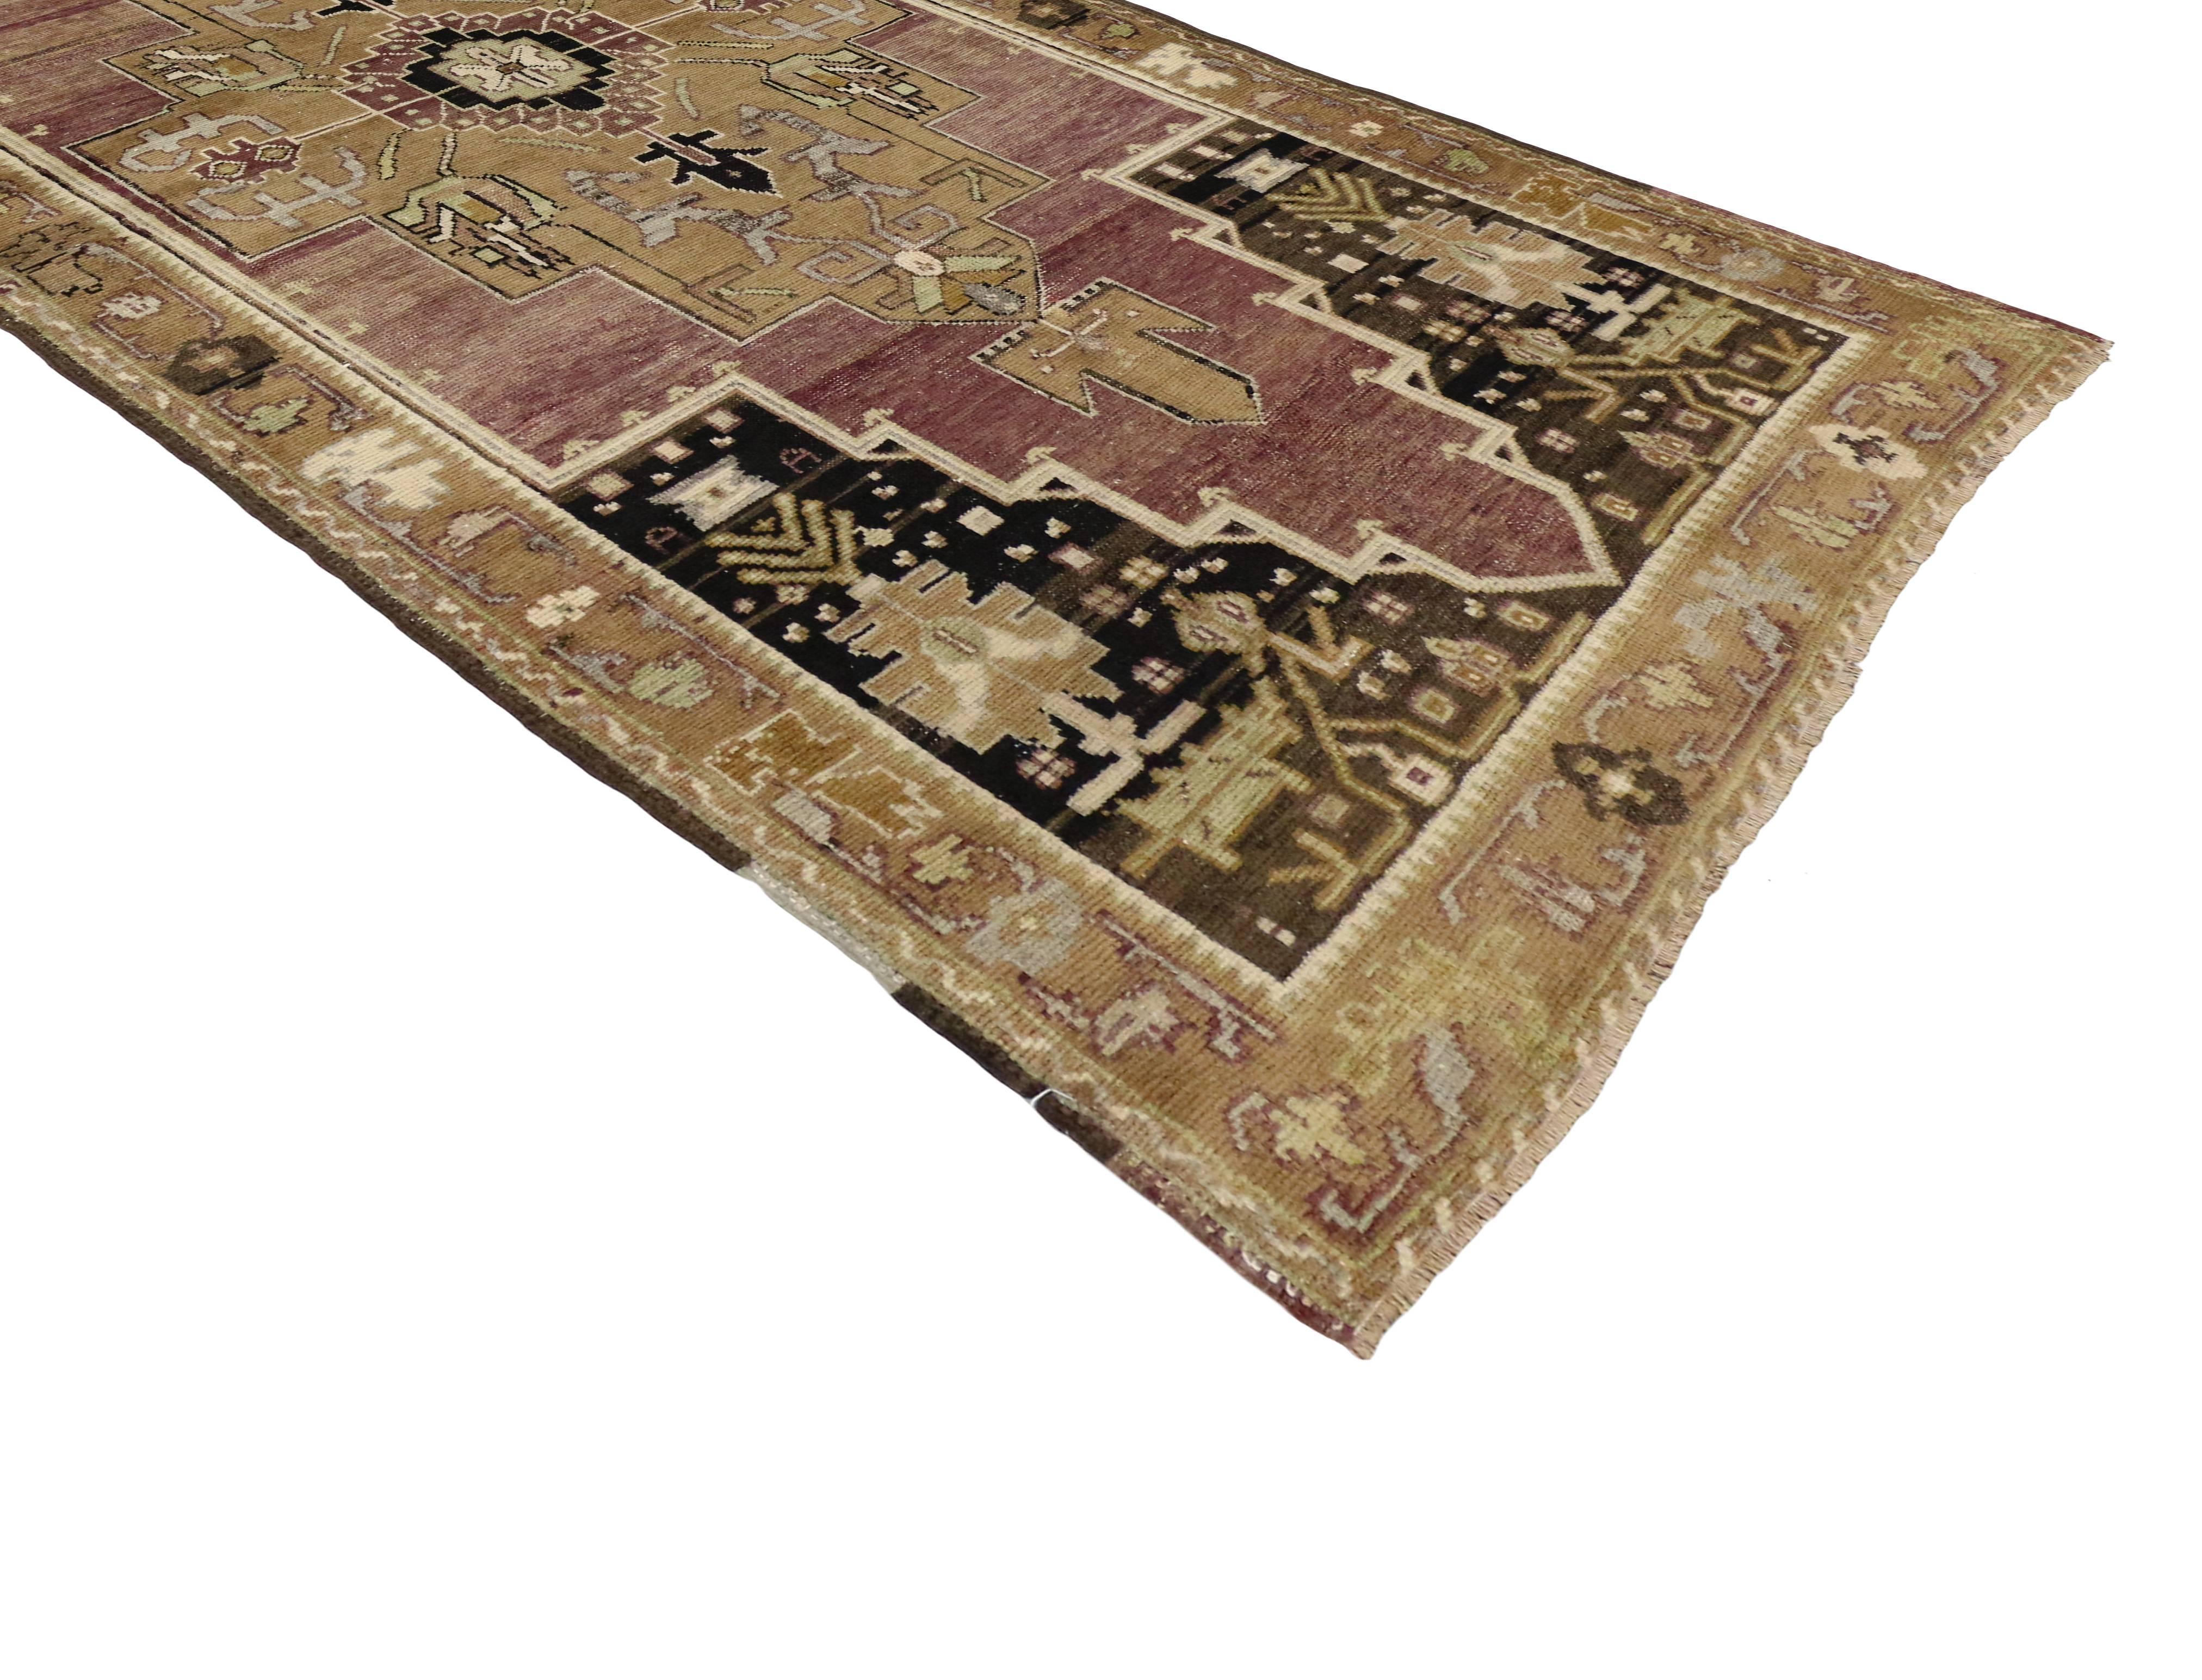 50291 Antique Turkish Oushak Runner with Modern Tribal Style. This hand-knotted wool antique Turkish Oushak runner features a centre medallion in an open field enclosed by stair-step spandrels and a rectilinear palmette and vine border. Rendered in